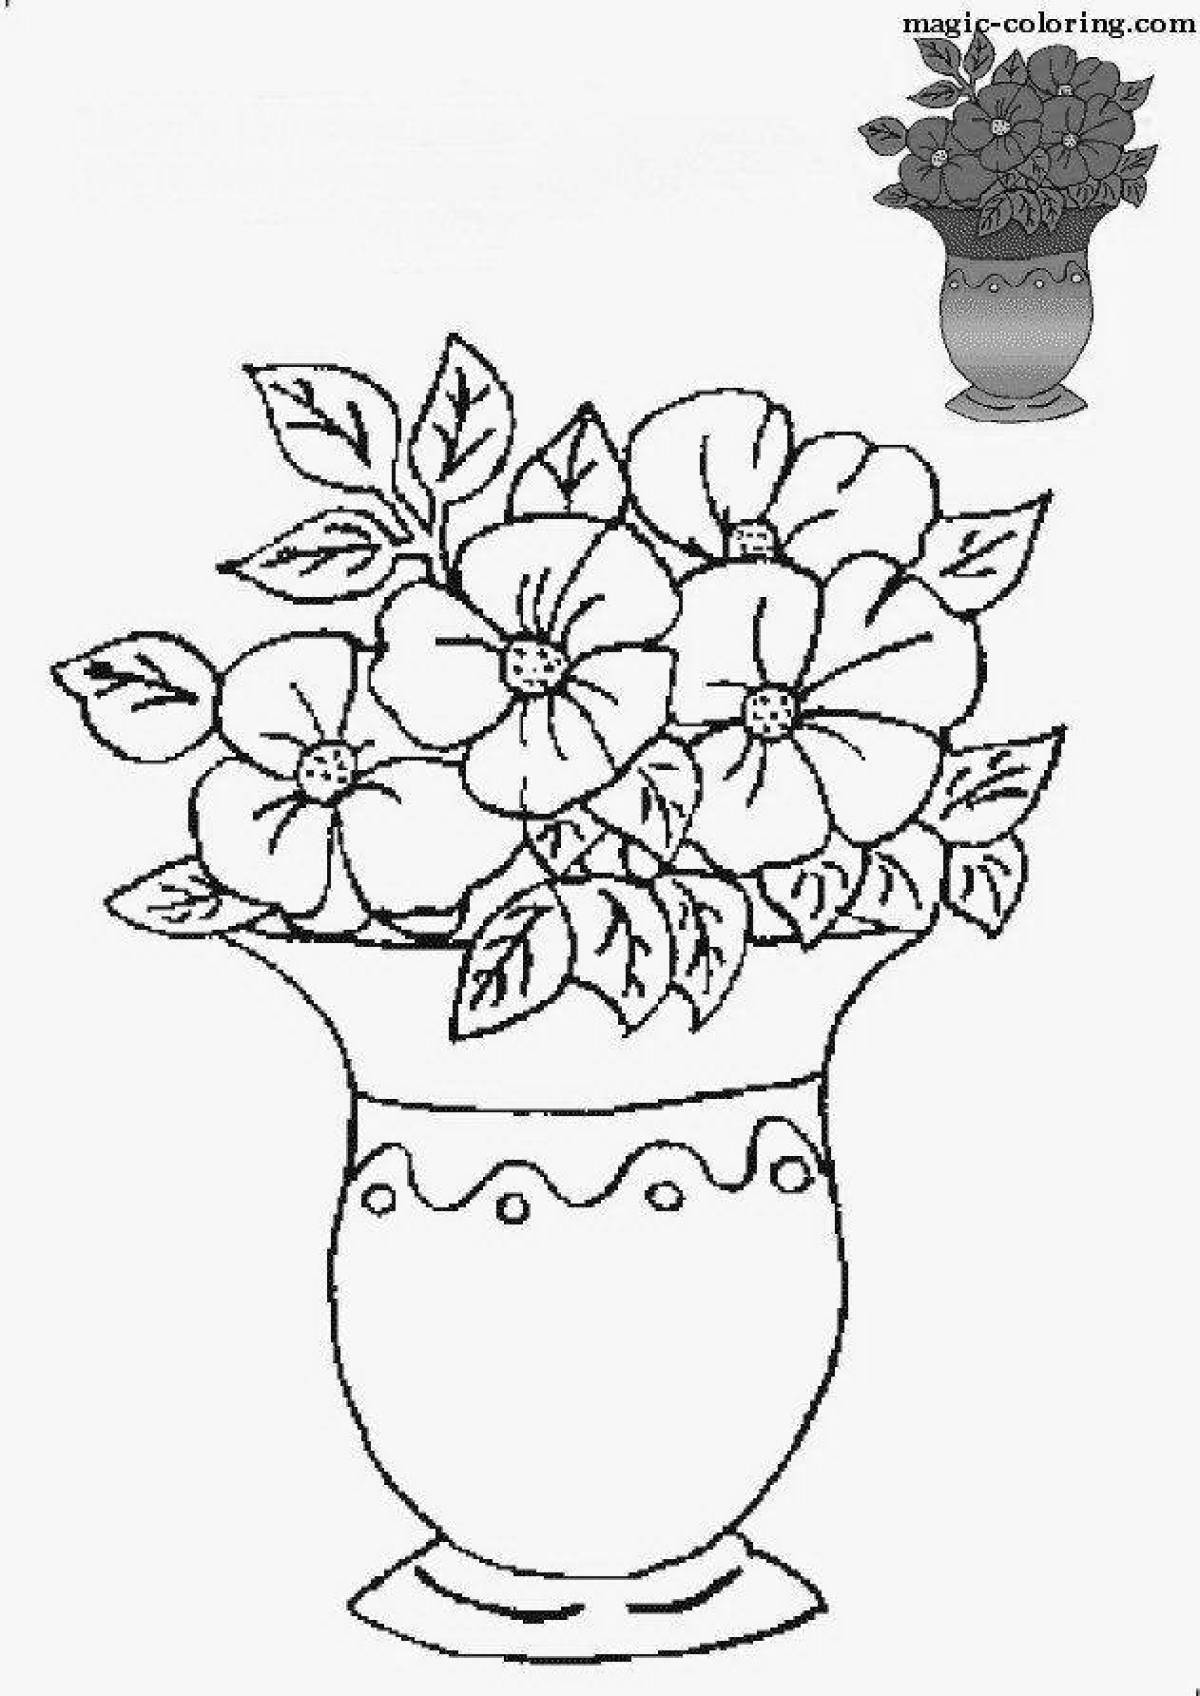 Coloring majestic vase of flowers